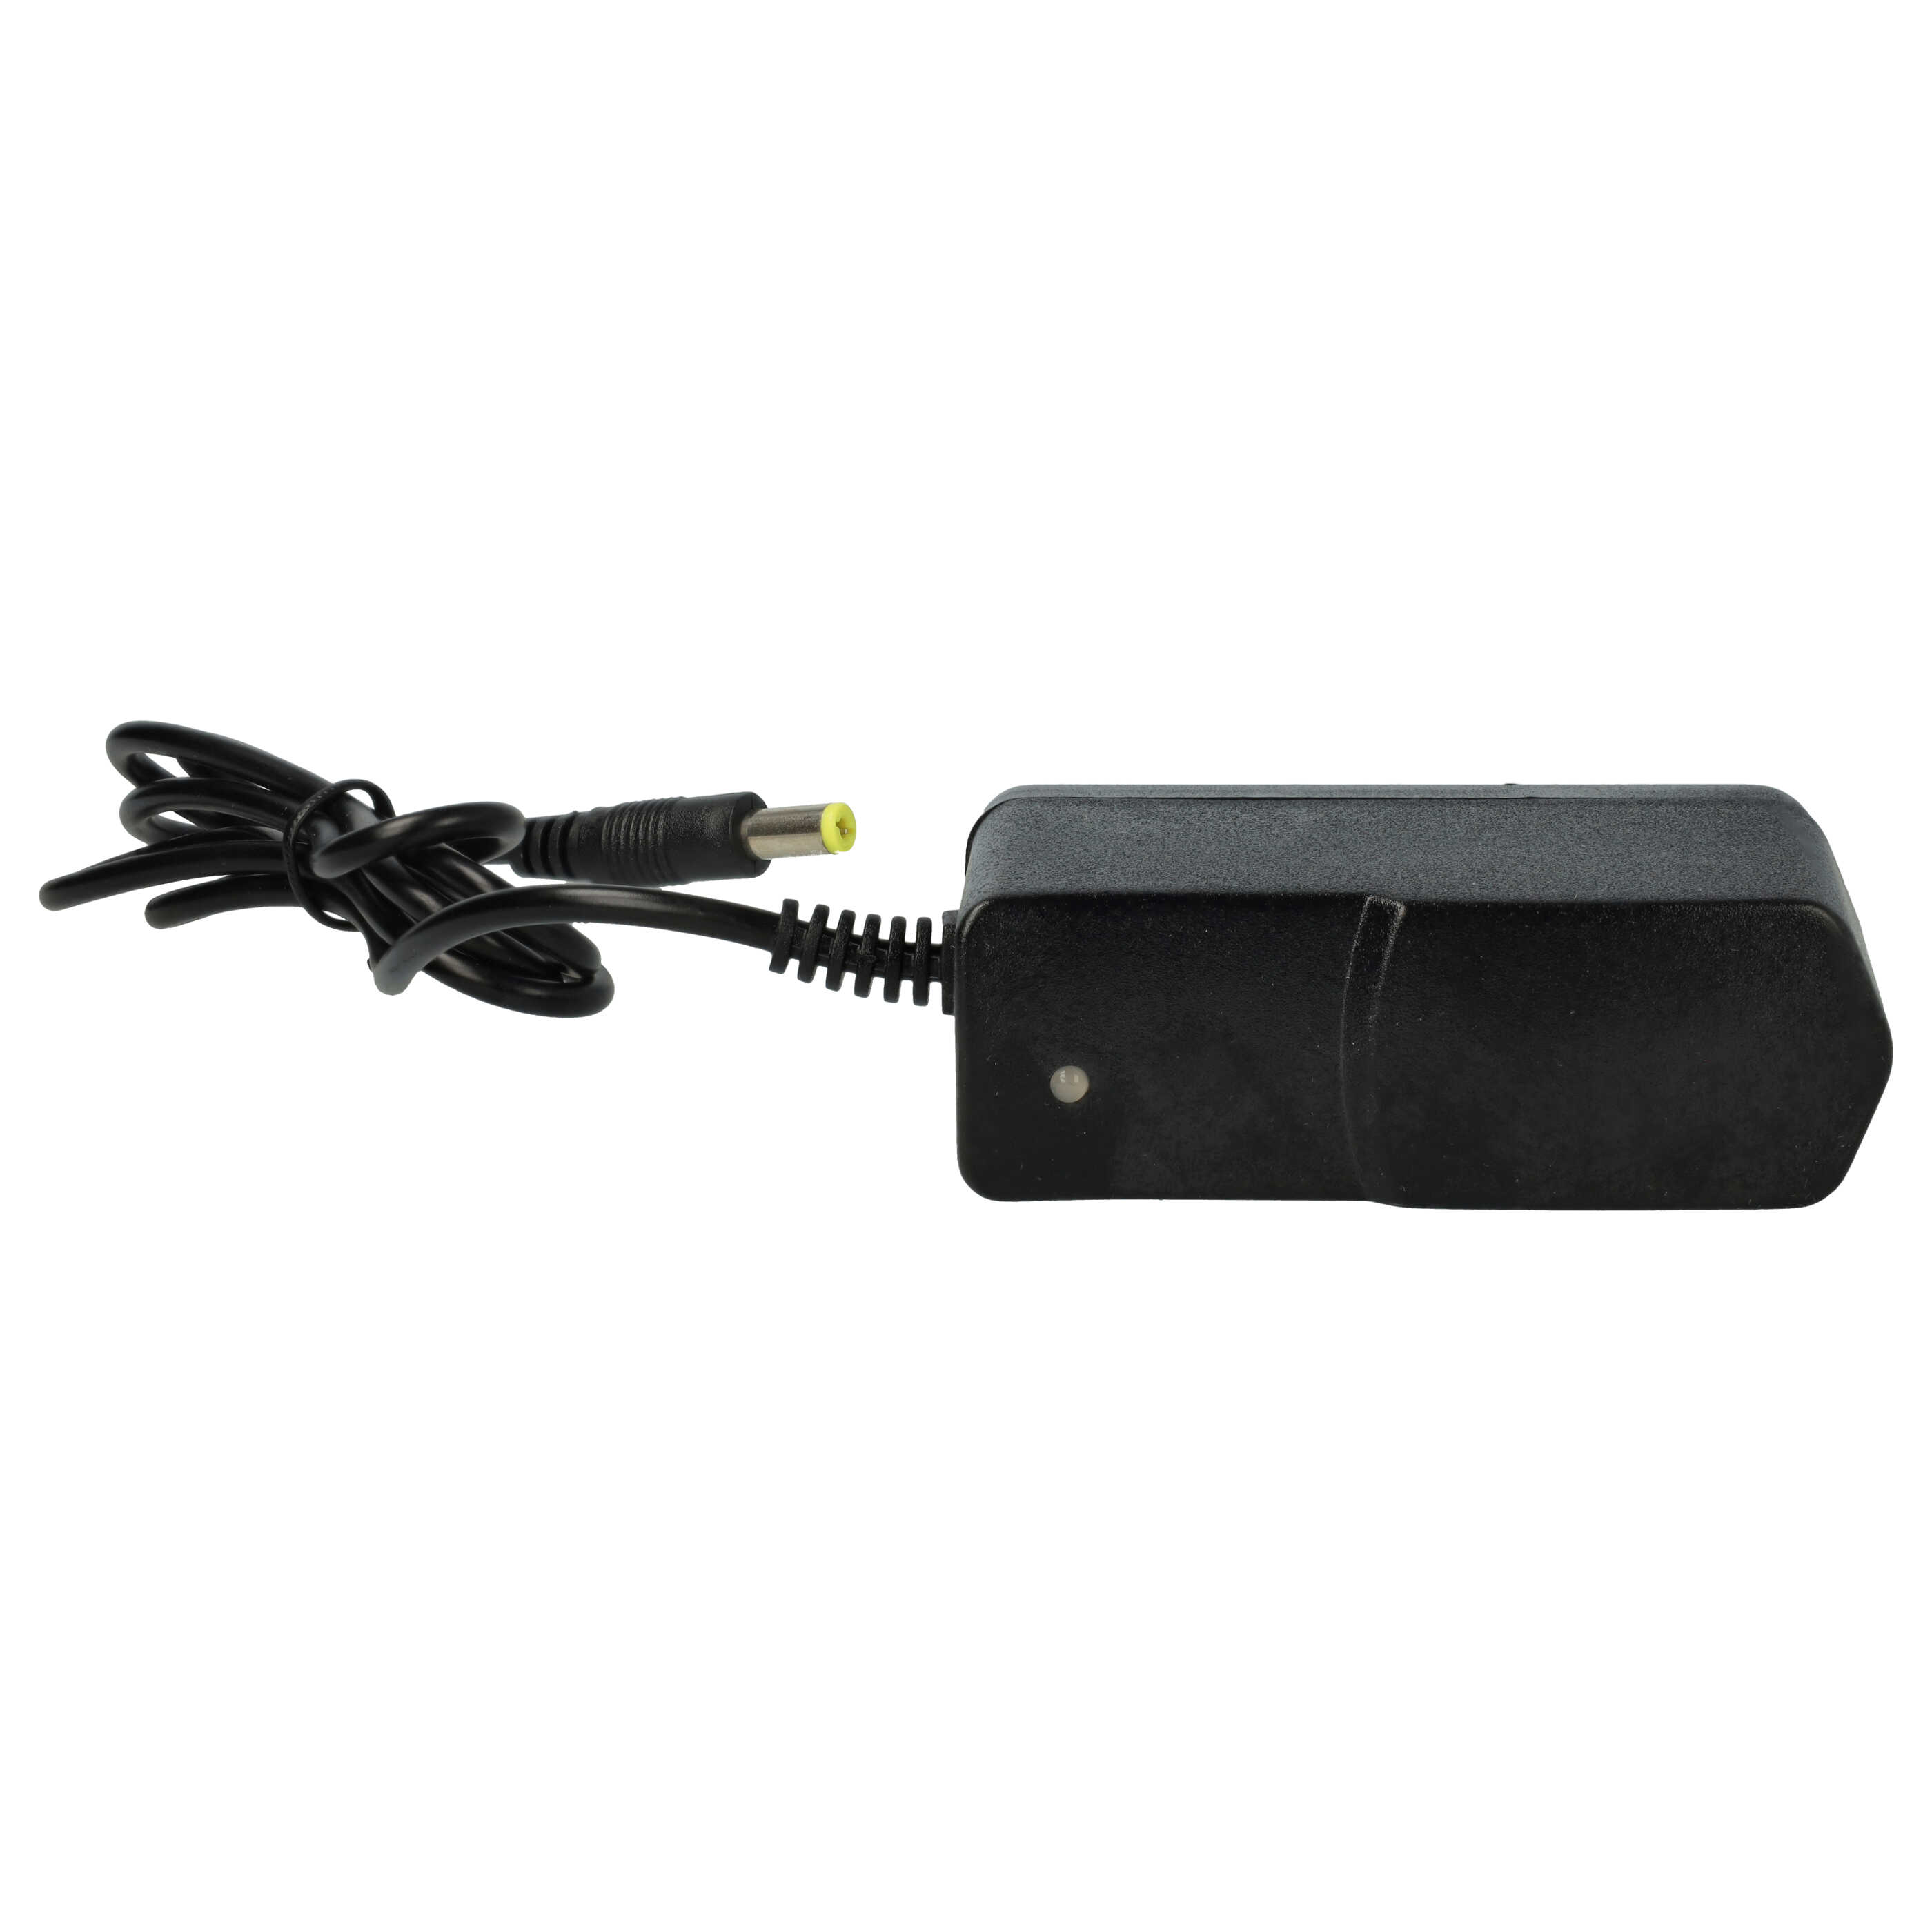 Charger suitable for CREE SSC-P7, XMLT6 LED Bike Light, Rechargeable Bike Light - DC 8.4 V, 1.0 A